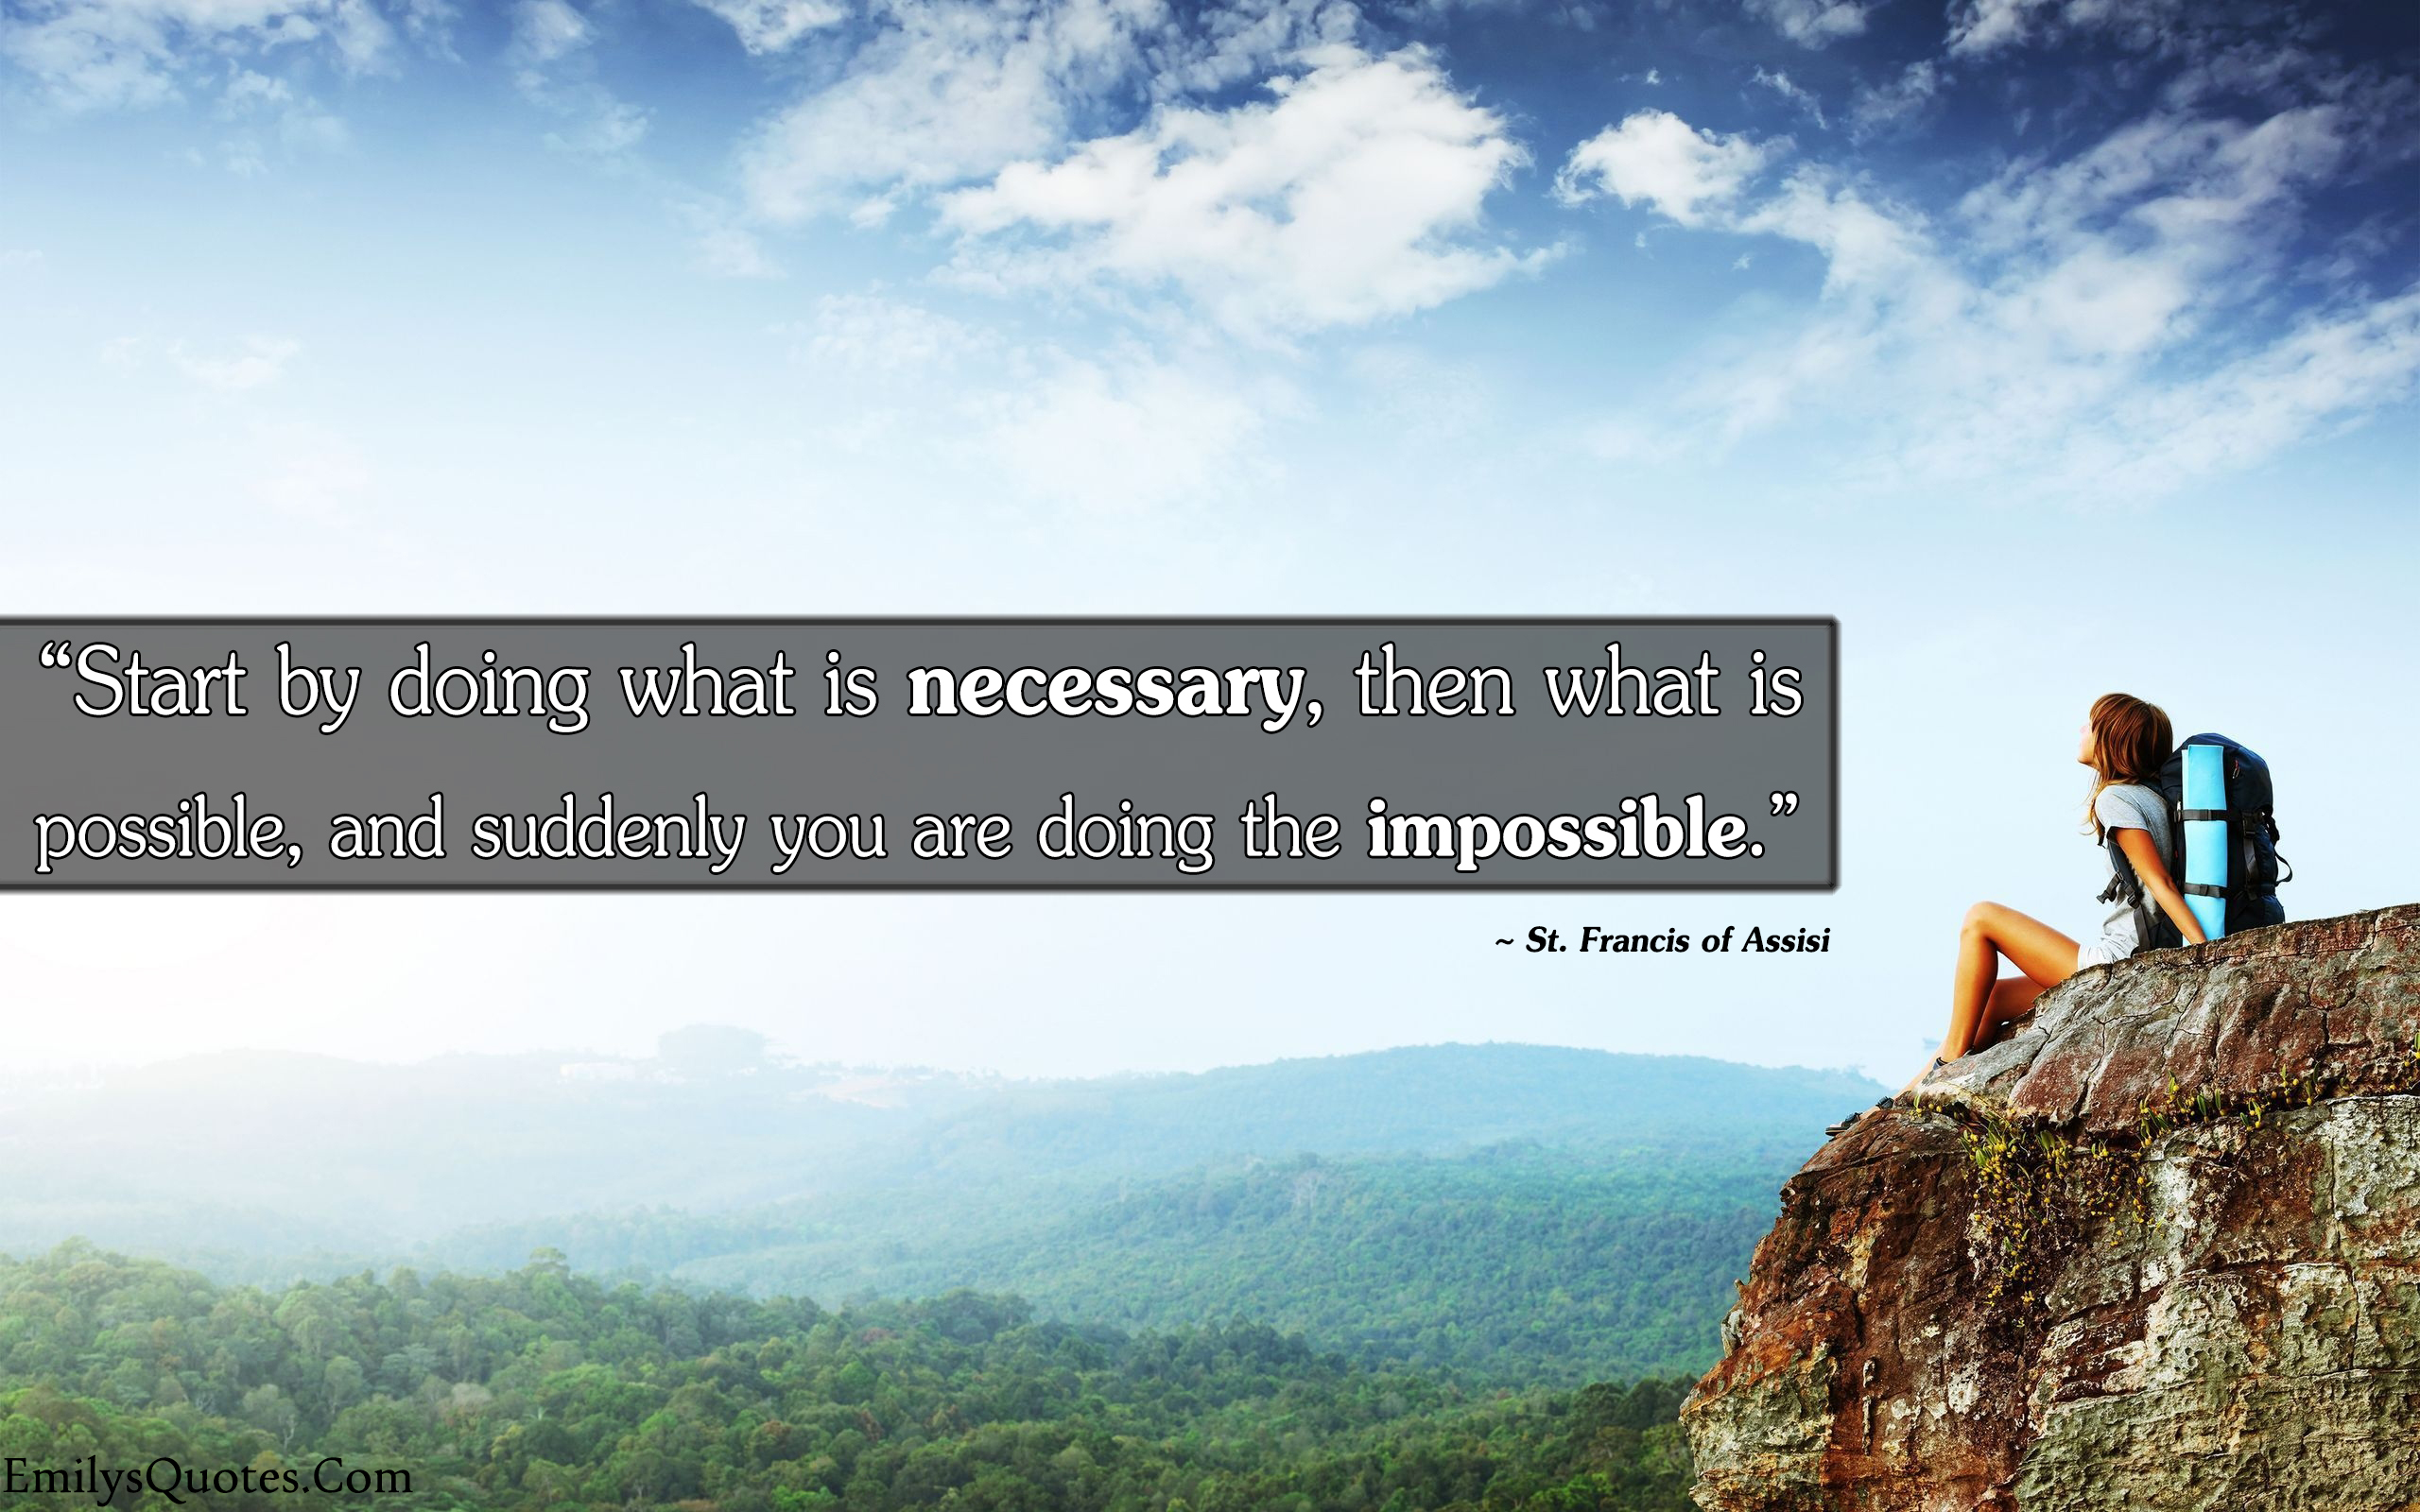 Start by doing what is necessary, then what is possible, and suddenly you are doing the impossible